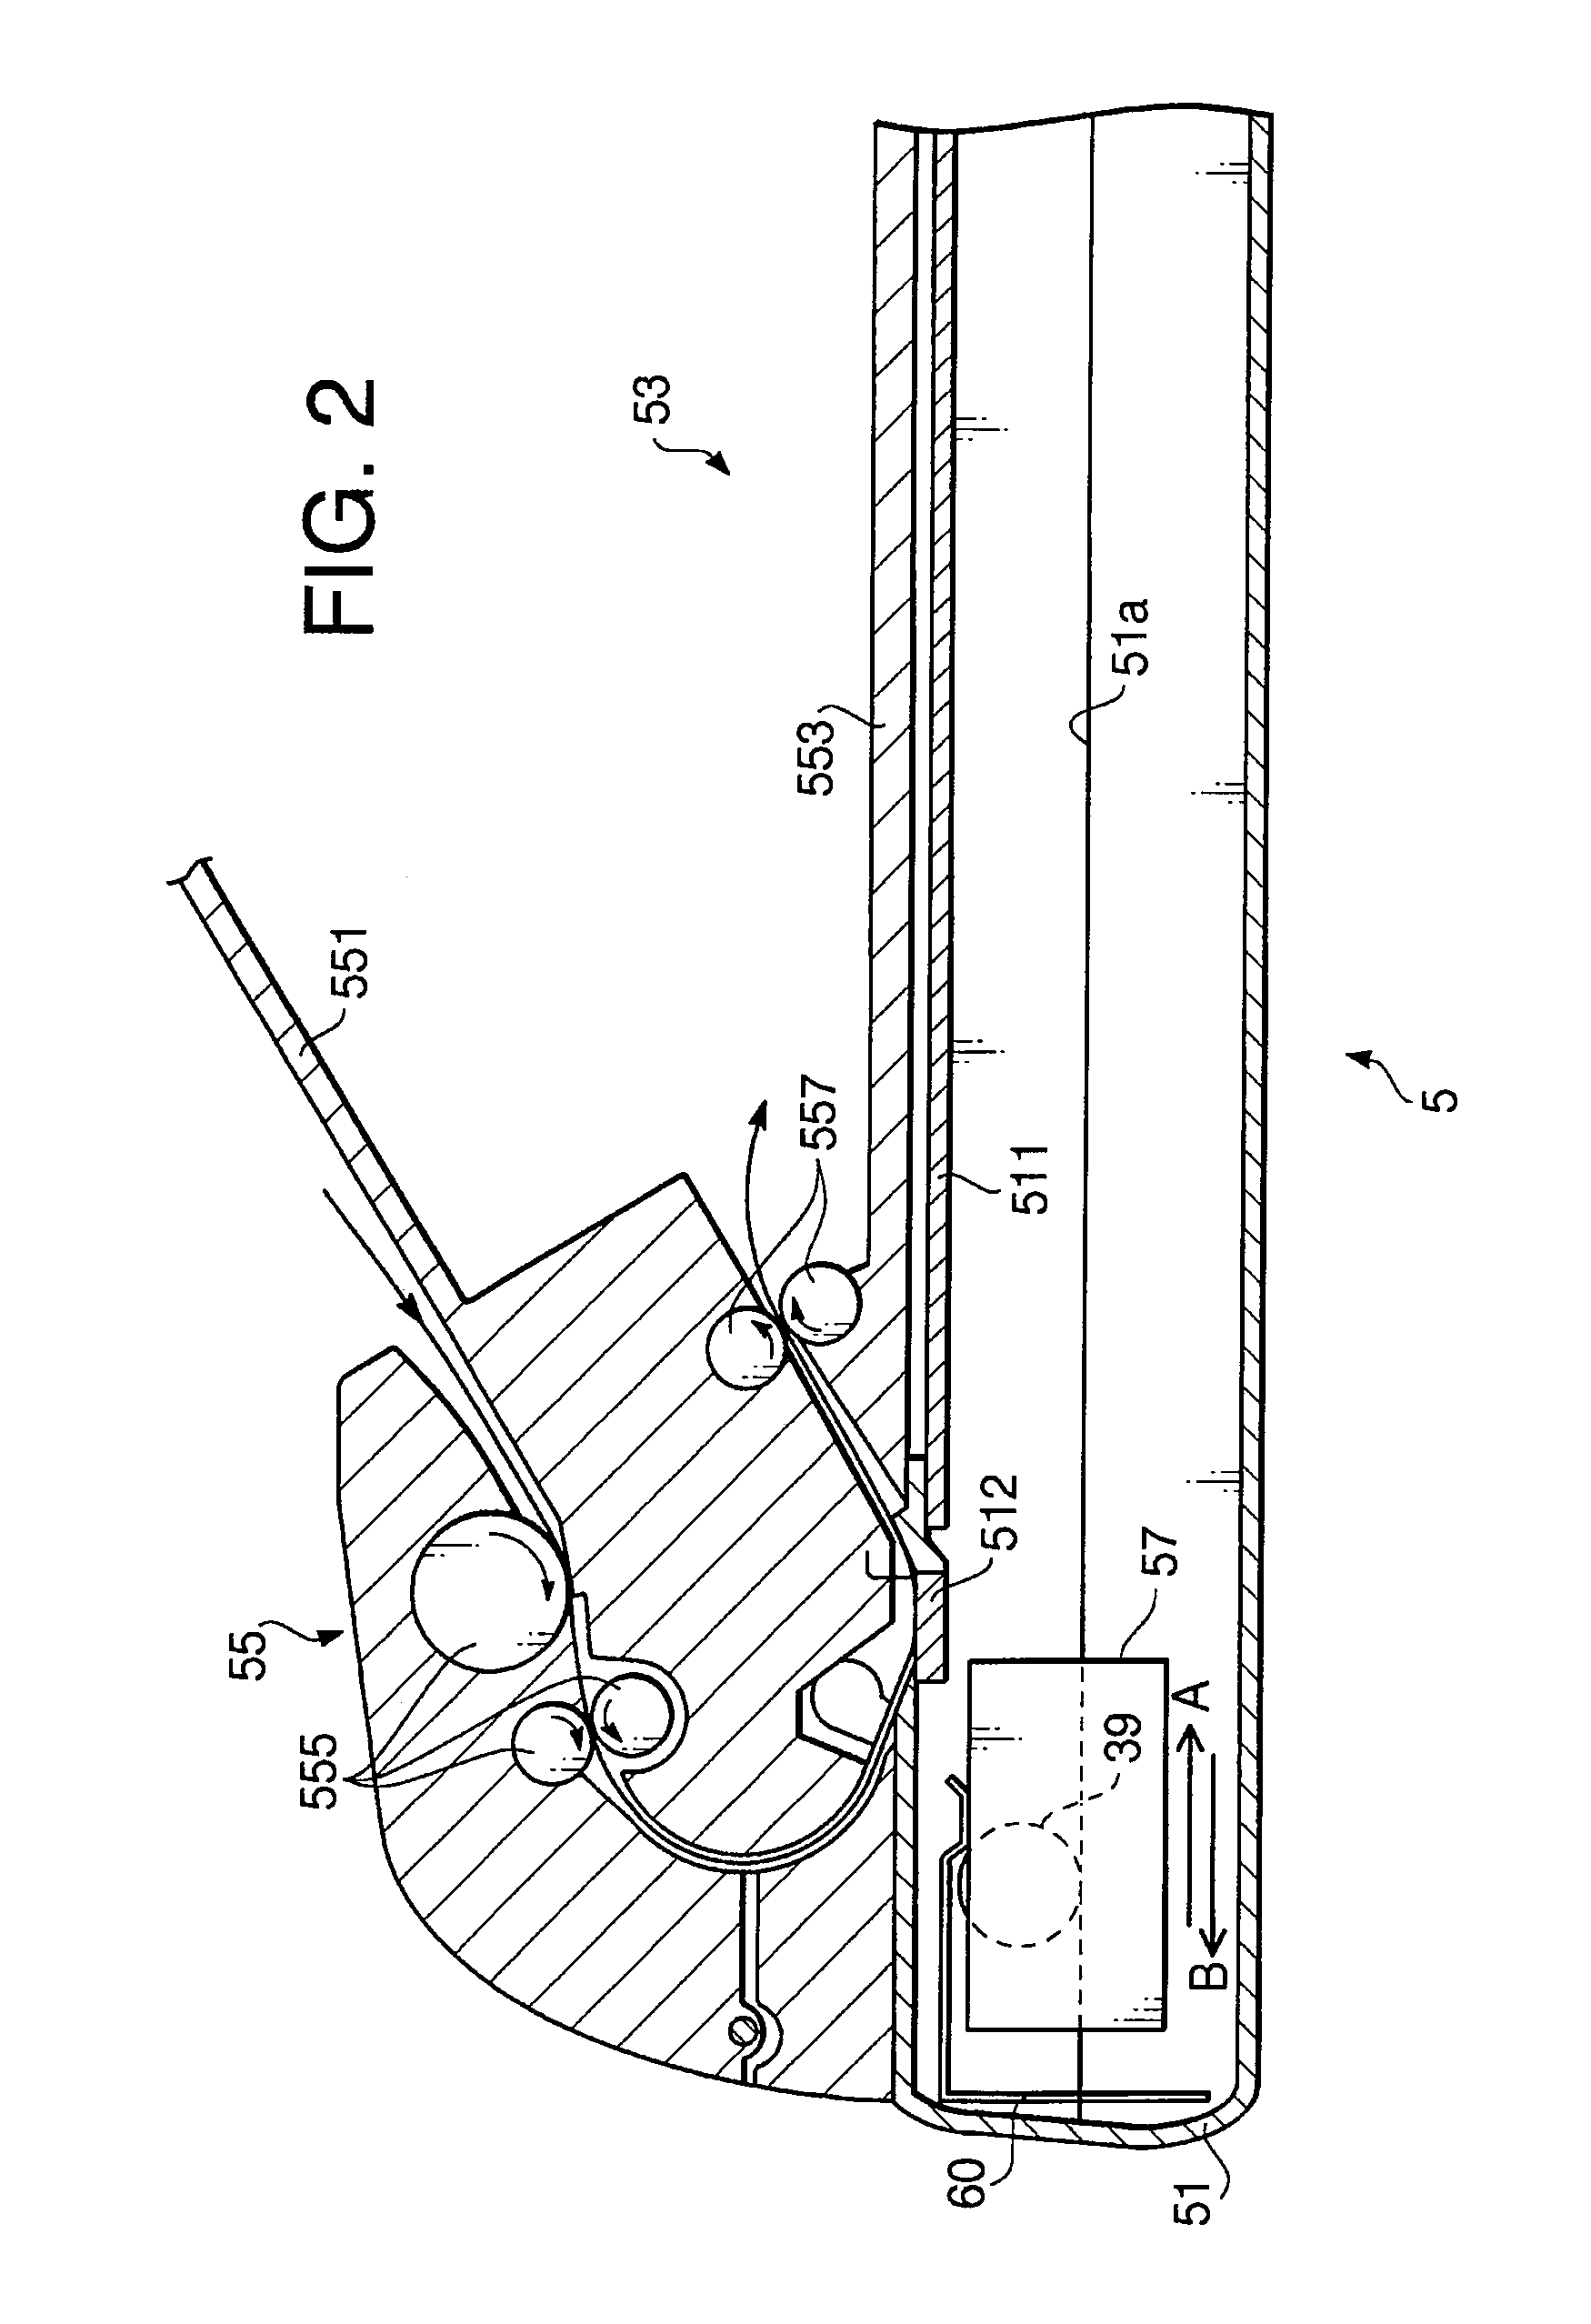 Carriage for image scanning unit including radiation plate for conducting heat